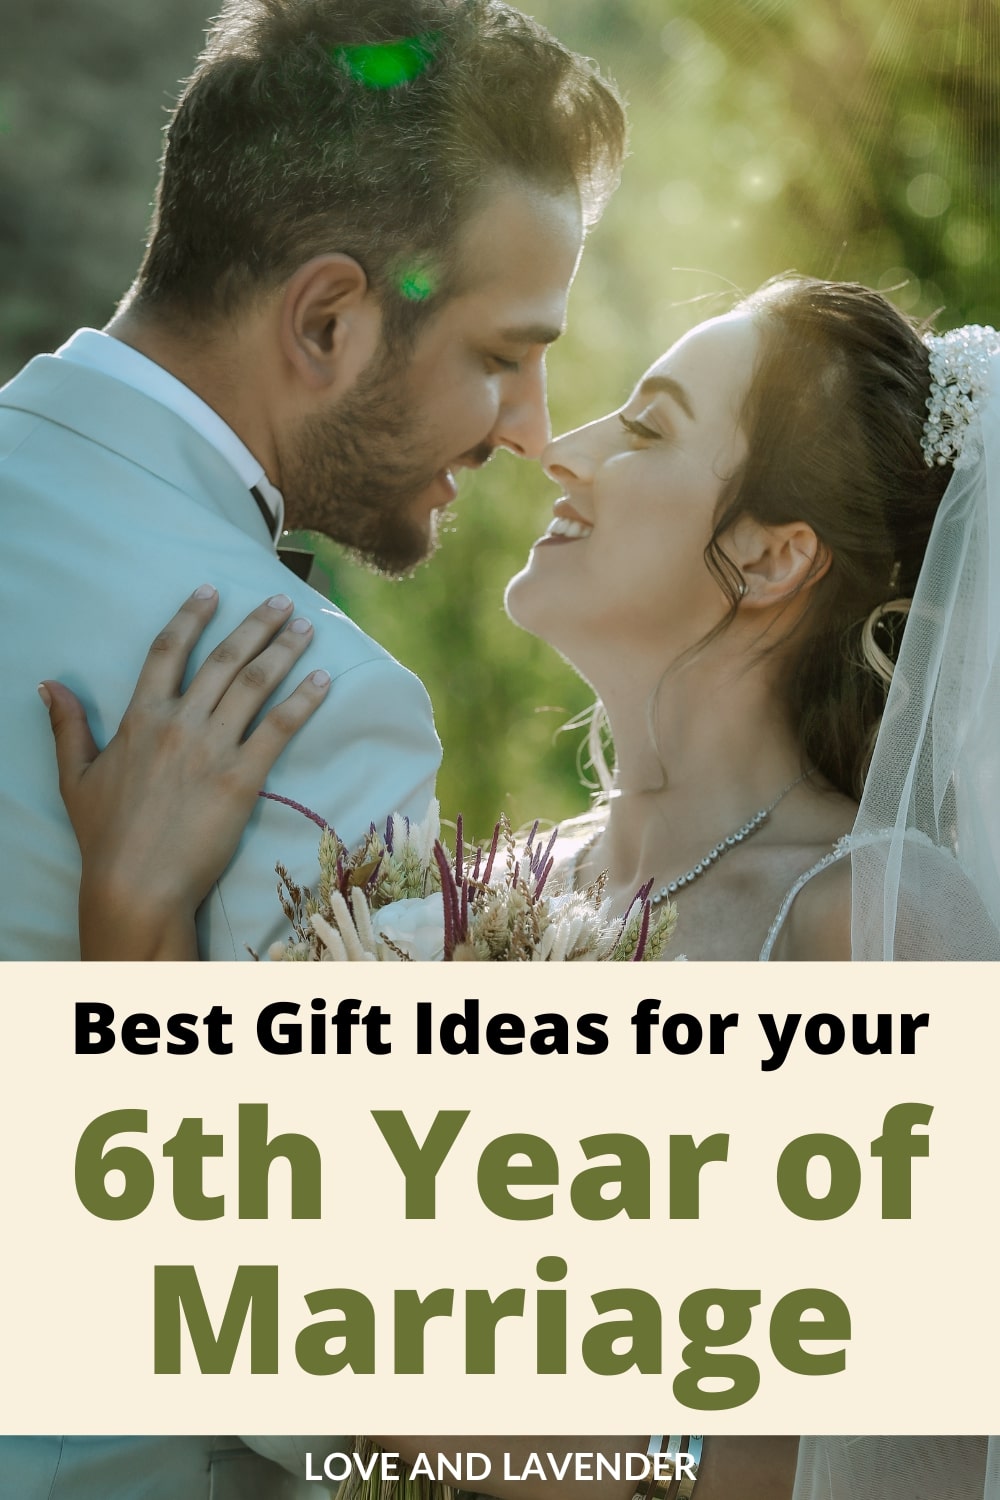 6th anniversary gifts on Pinterest